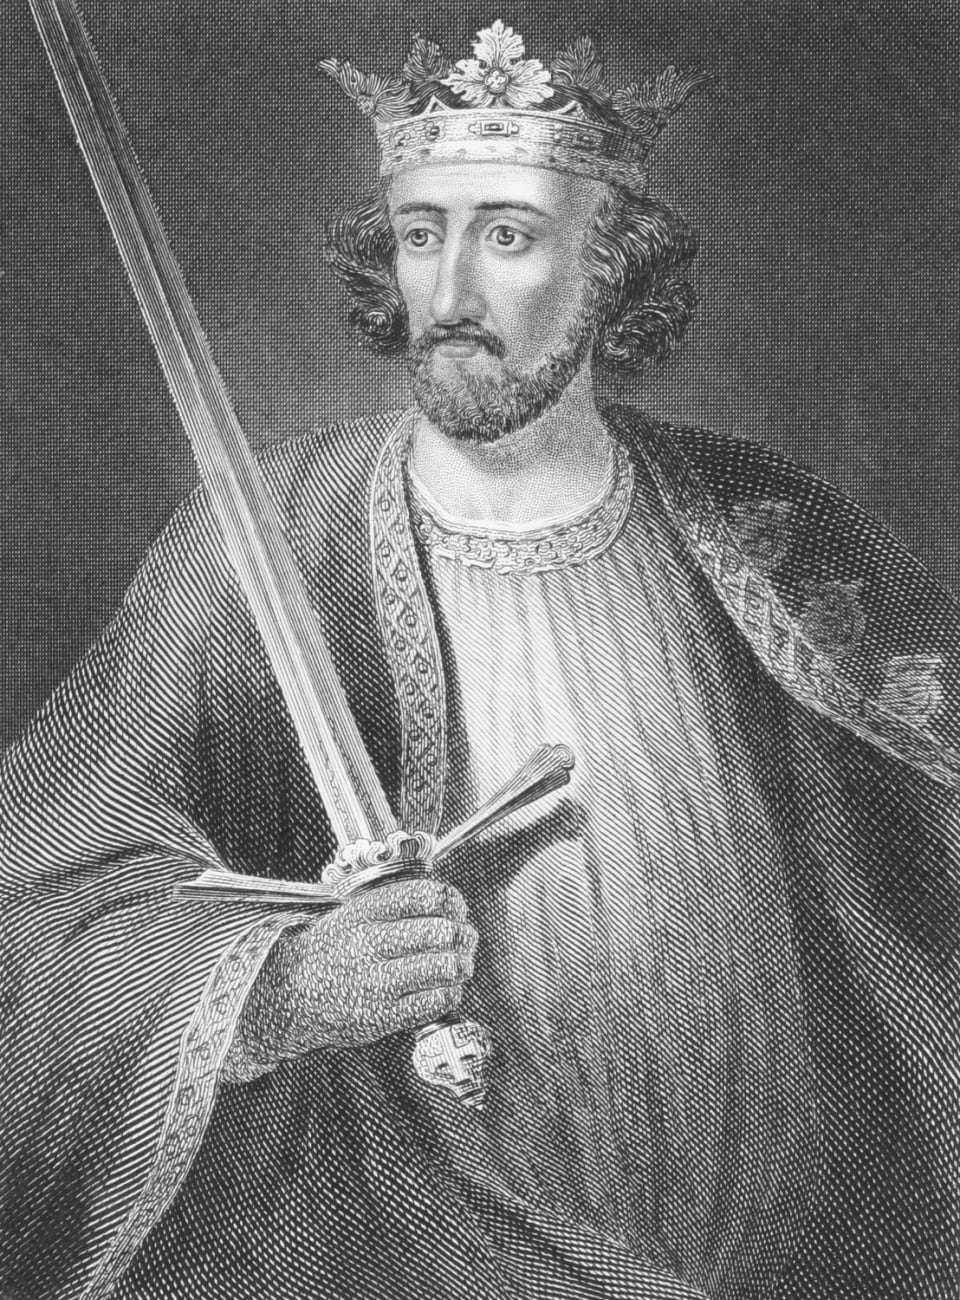 In July 1290, a general expulsion of Jews was ordered by King Edward I. He made it clear that by November 1, all Jews had to leave the country or face execution.  The Hebrew date on which this edict was announced was Tisha Be’Av About 2,000 Jews were exiled from England, while less than a hundred converted to Christianity. Interestingly, the Tower of London served as the main point of exit for Jews who traveled out of England via the Thames River. Were that not bad enough, the exiled Jews were charged a deportation tax by the constable of the tower. The edict of expulsion ordered by the king was not viewed by historians as a sudden decision. For more than 200 years prior to this, Jews were subjected to increased persecution, which had already started with rumors of blood libels and pogroms in the 12th and 13th Century.Following the edict in 1290, Jews were not allowed to live in England until the 1650s, under Oliver Cromwell.